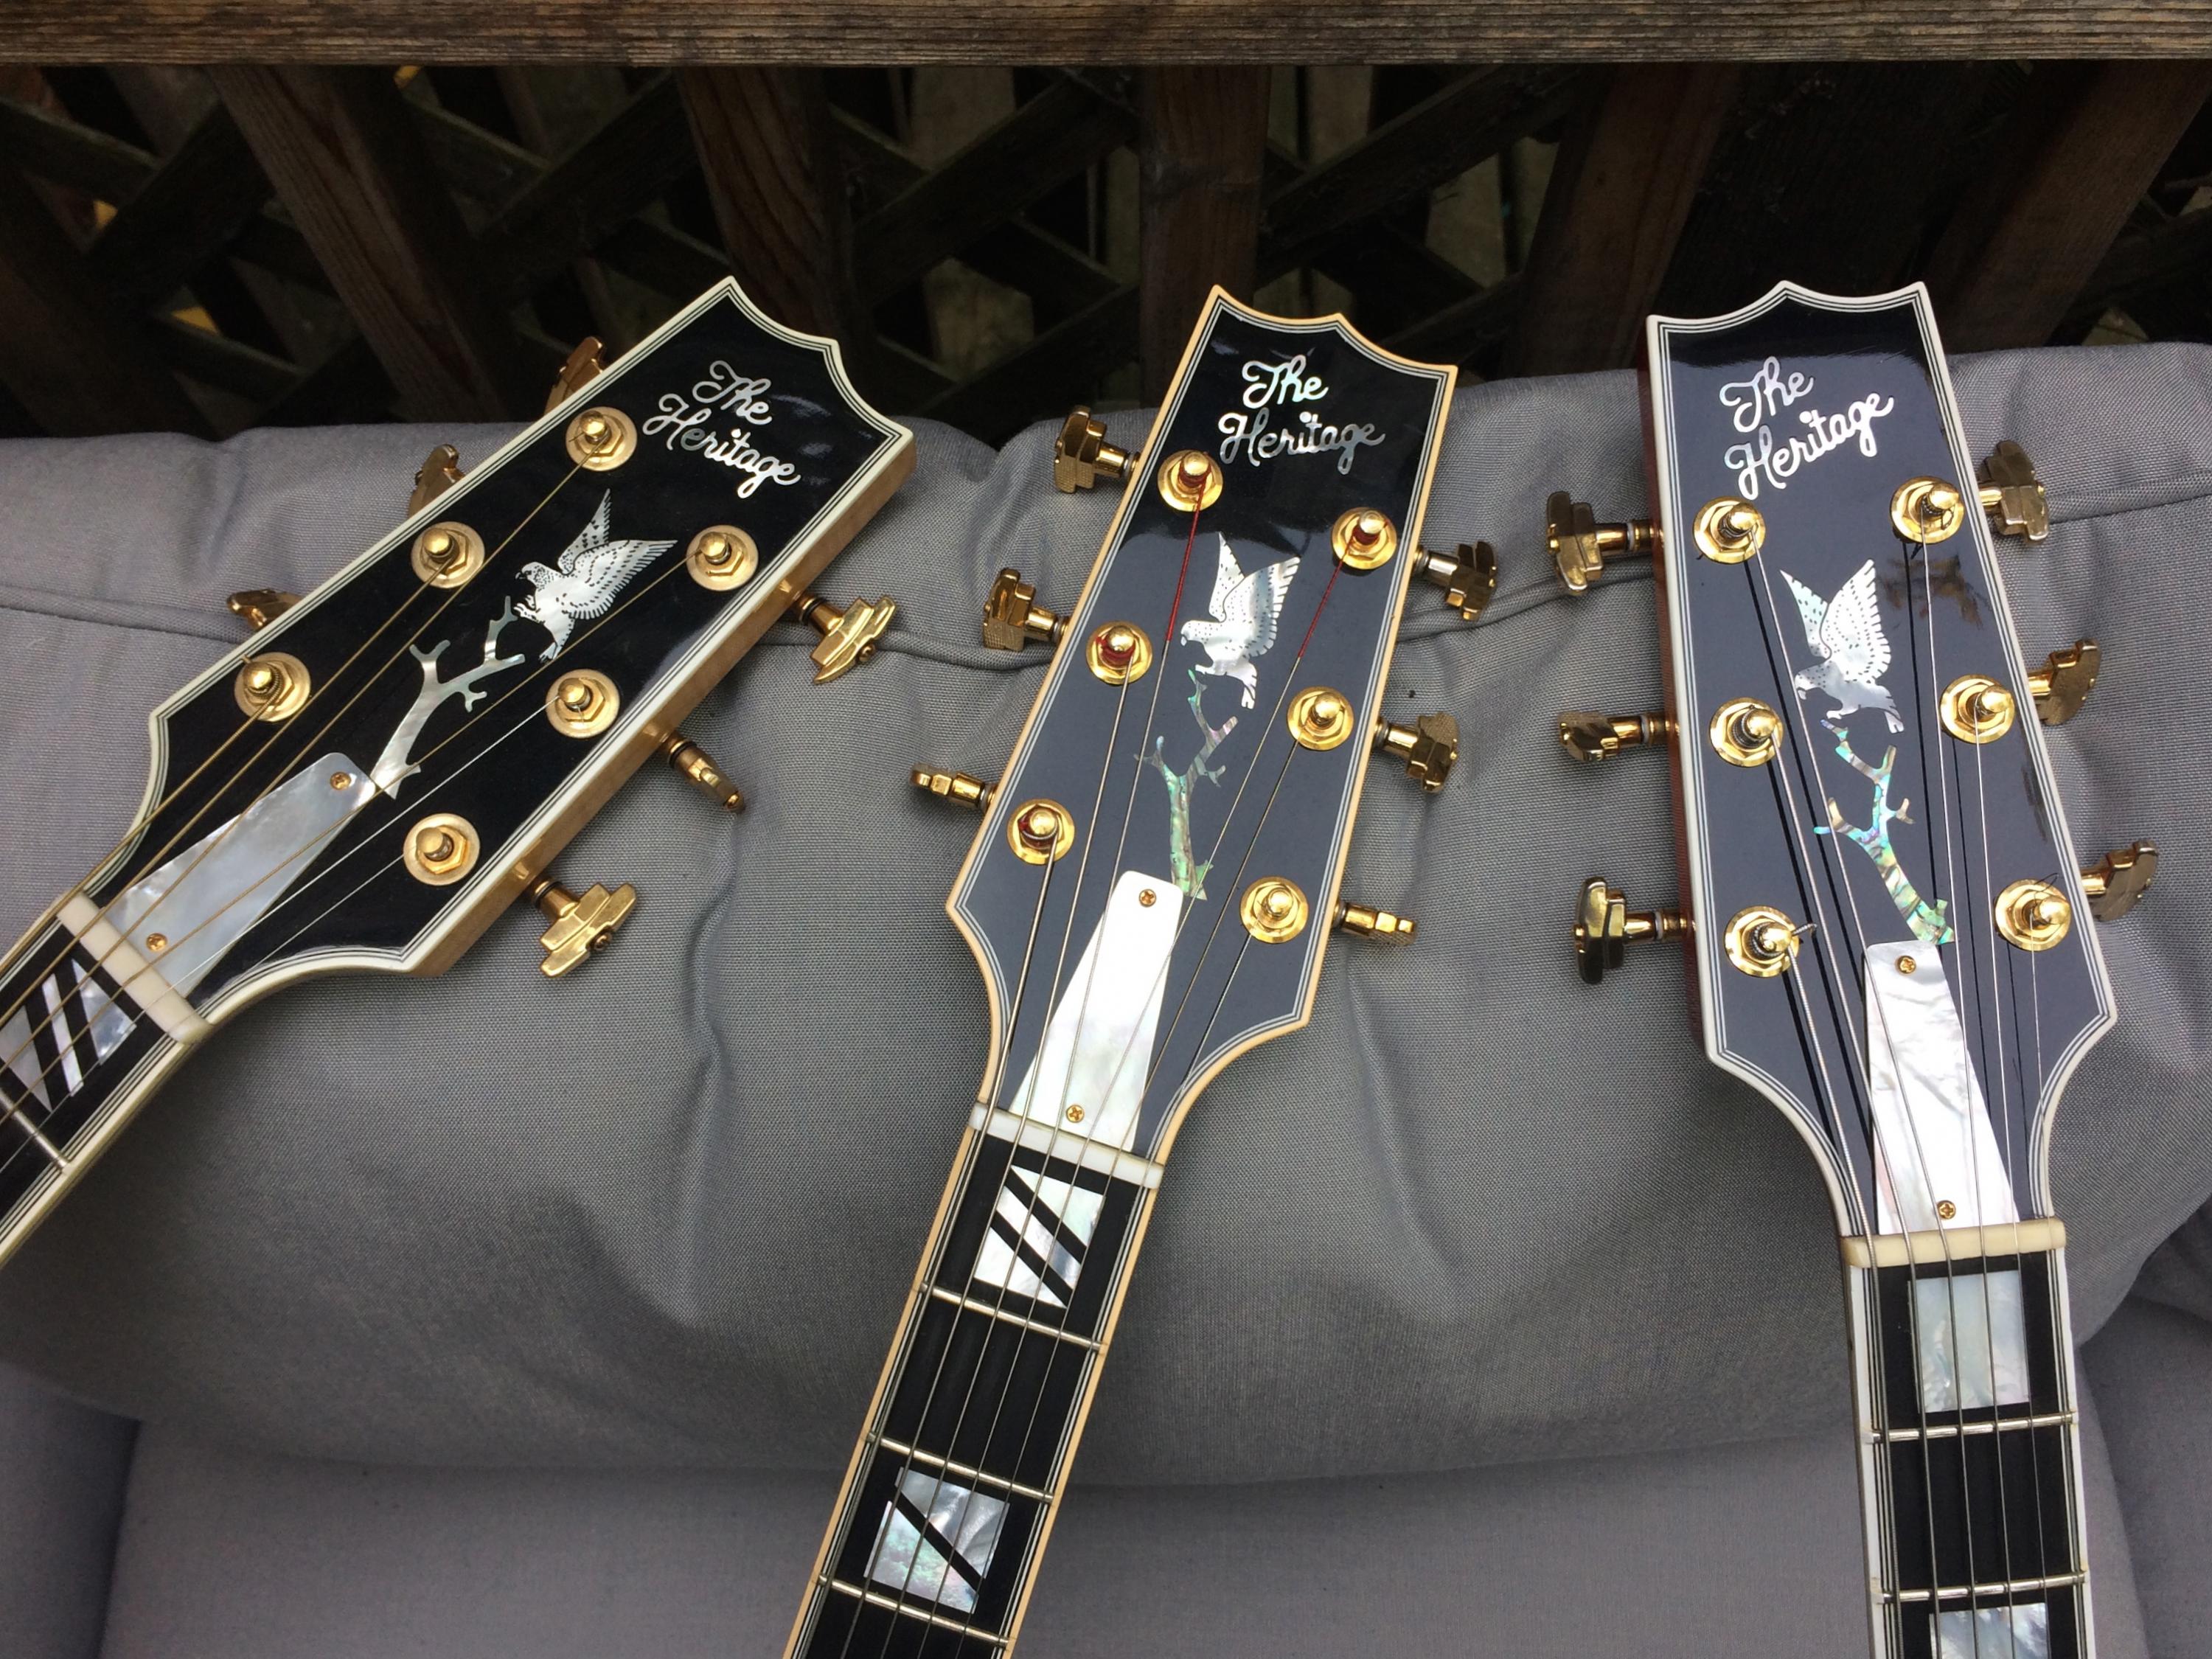 Heritage again - but seriously...-heritage-x3-headstocks_2306x-jpg